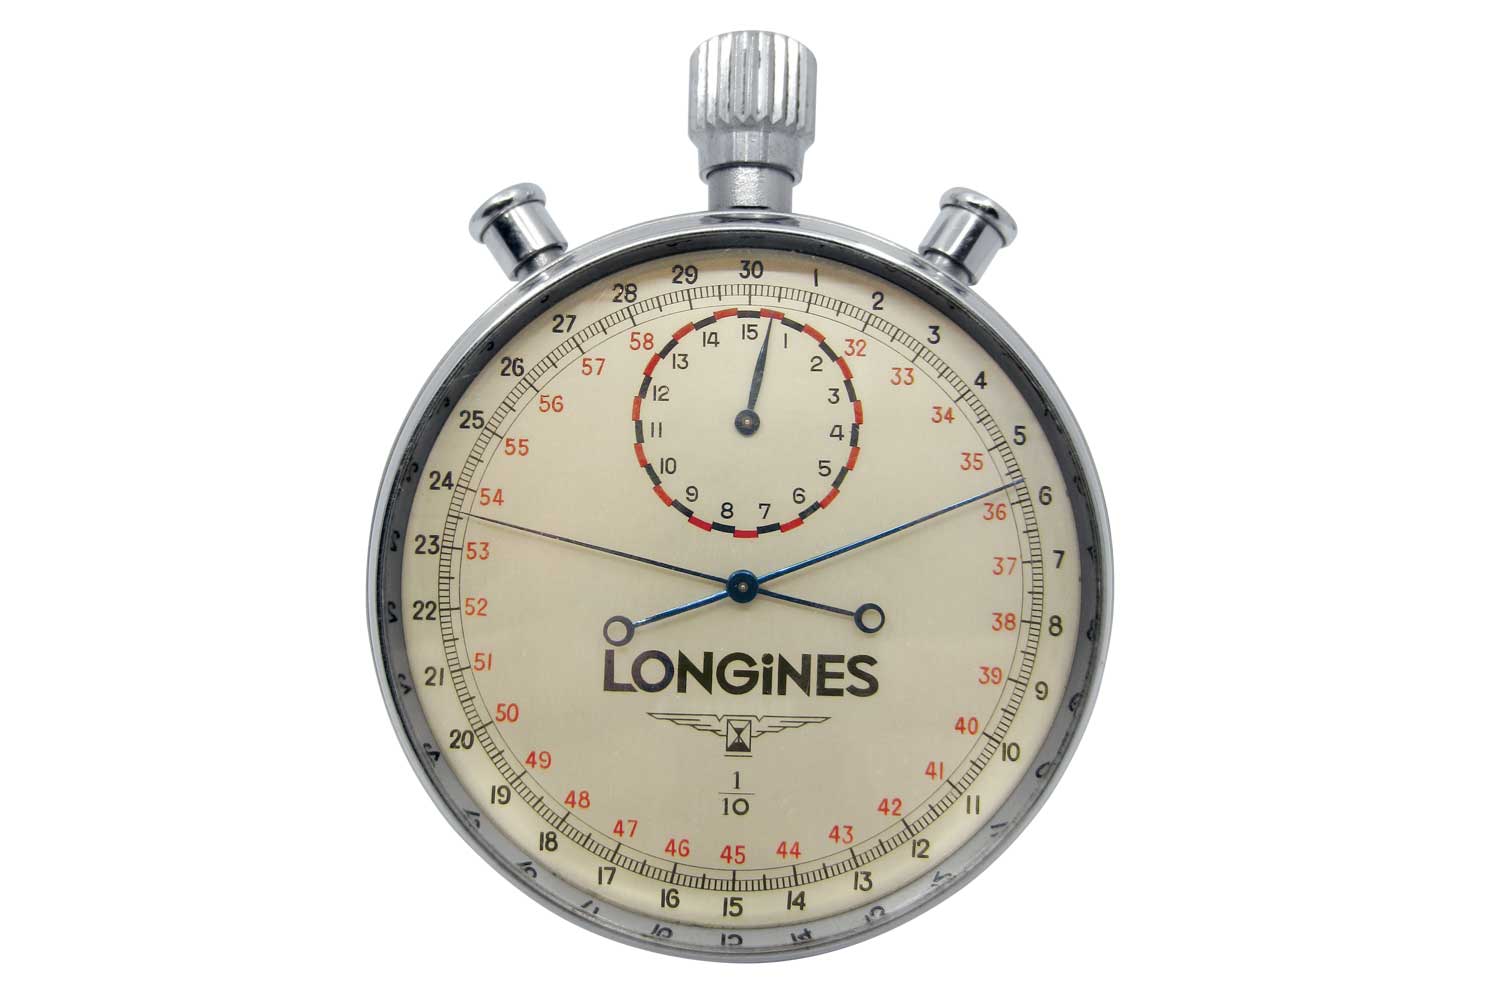 In 1914, Longines developed the first stopwatch with a high- frequency movement, the 19.73N caliber, beating 36.000 times per hour, to measure 1/10th of a second